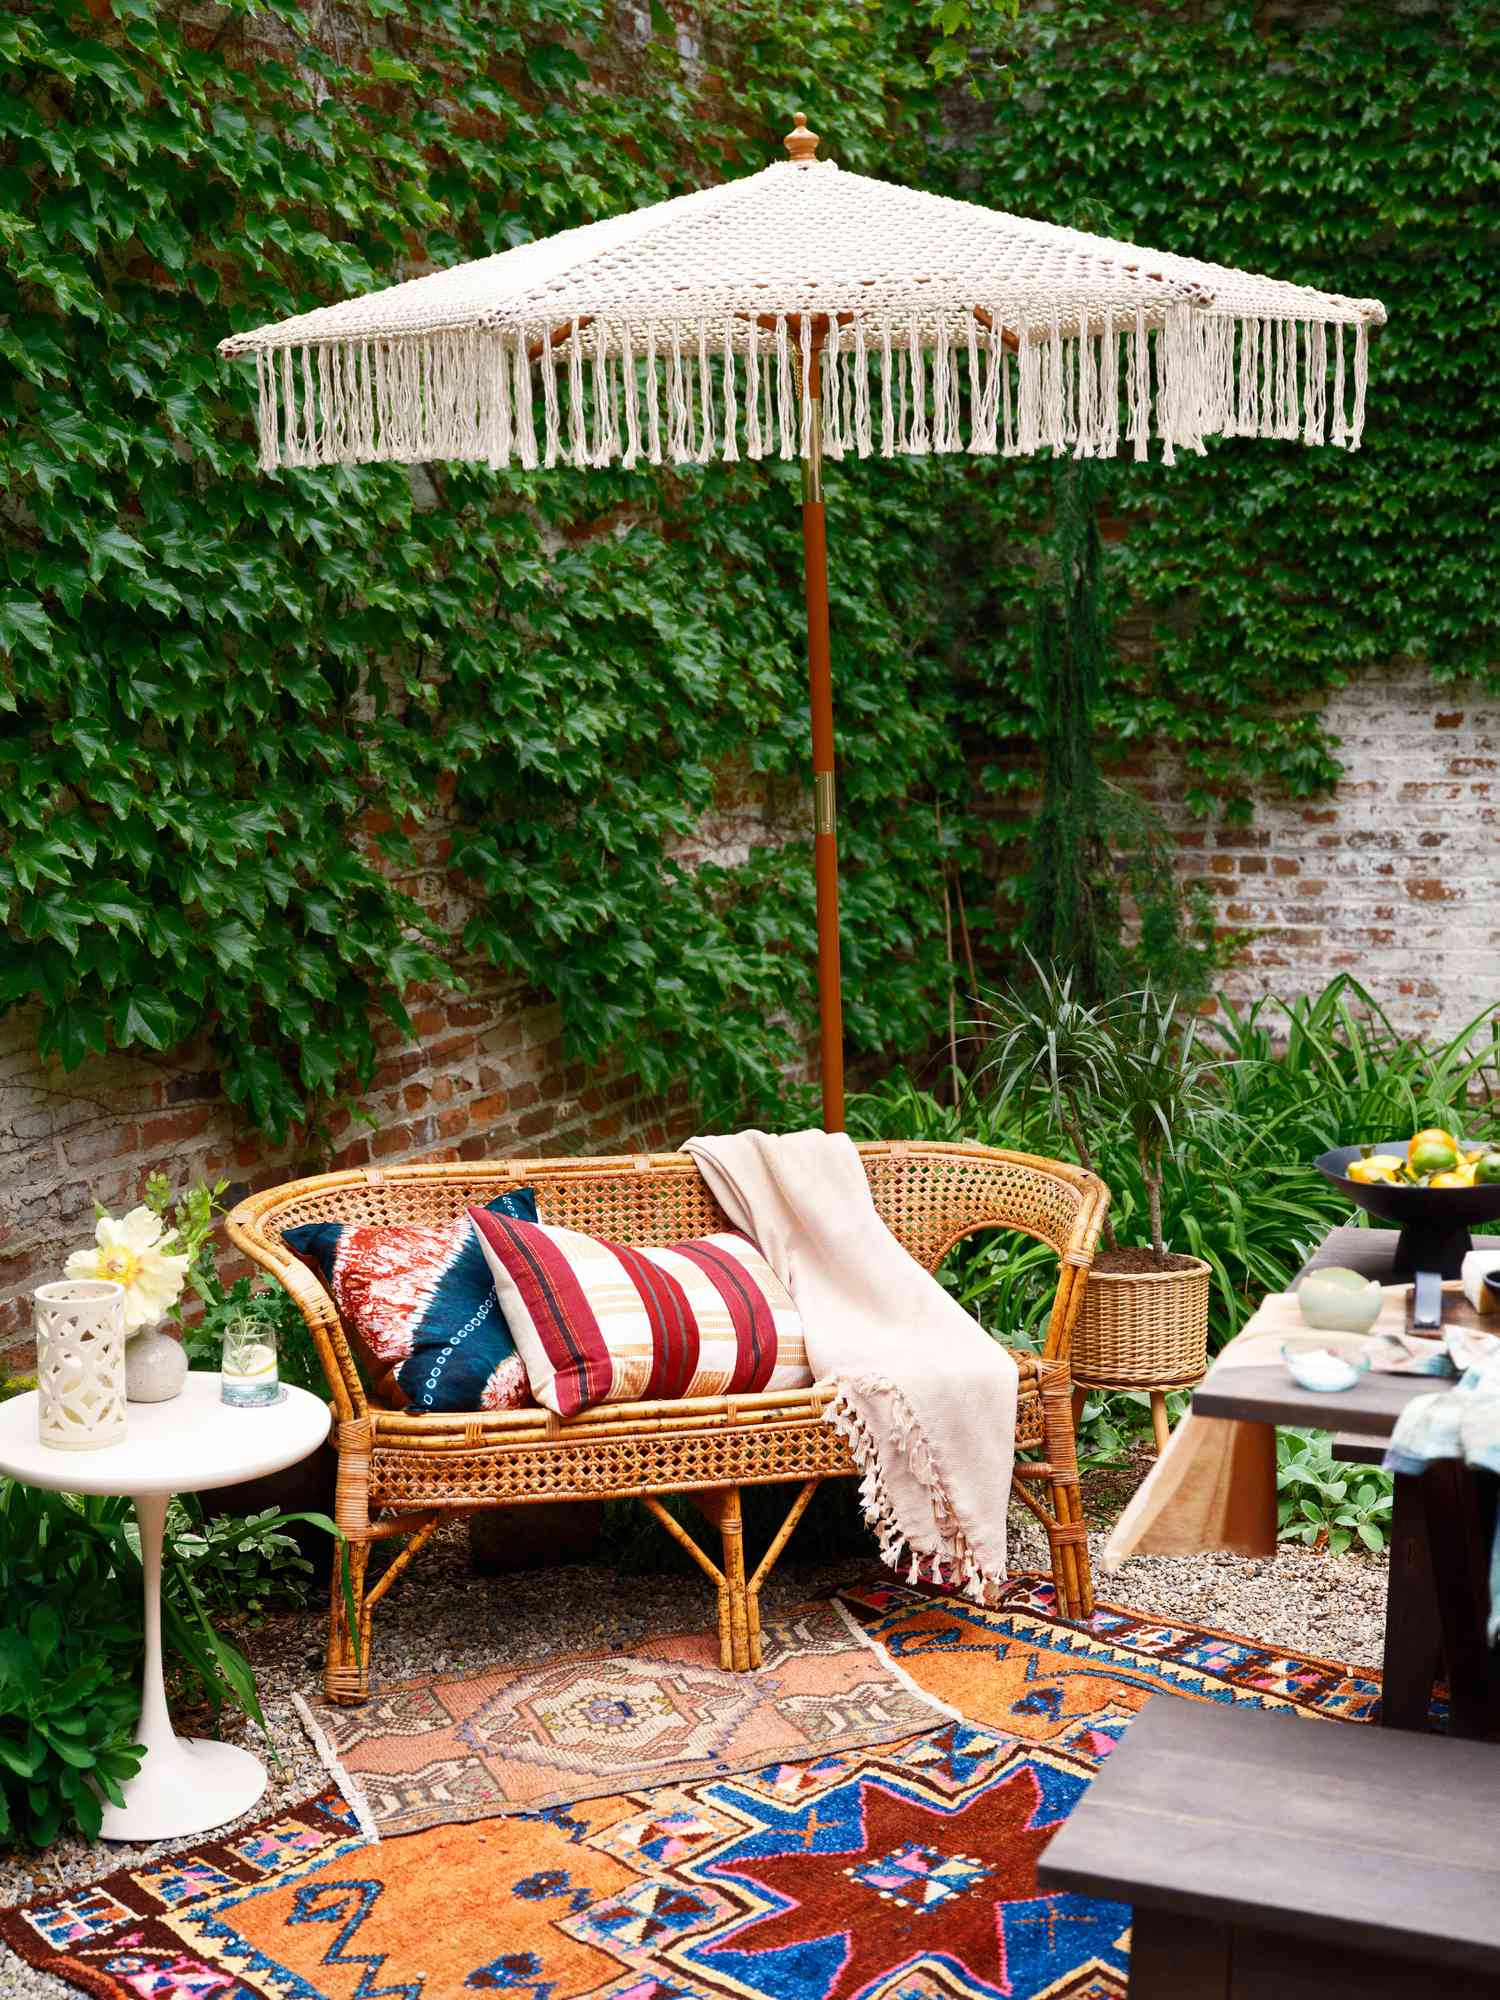 macrame umbrelly sits among a settee, and colorful rugs and throw pillows